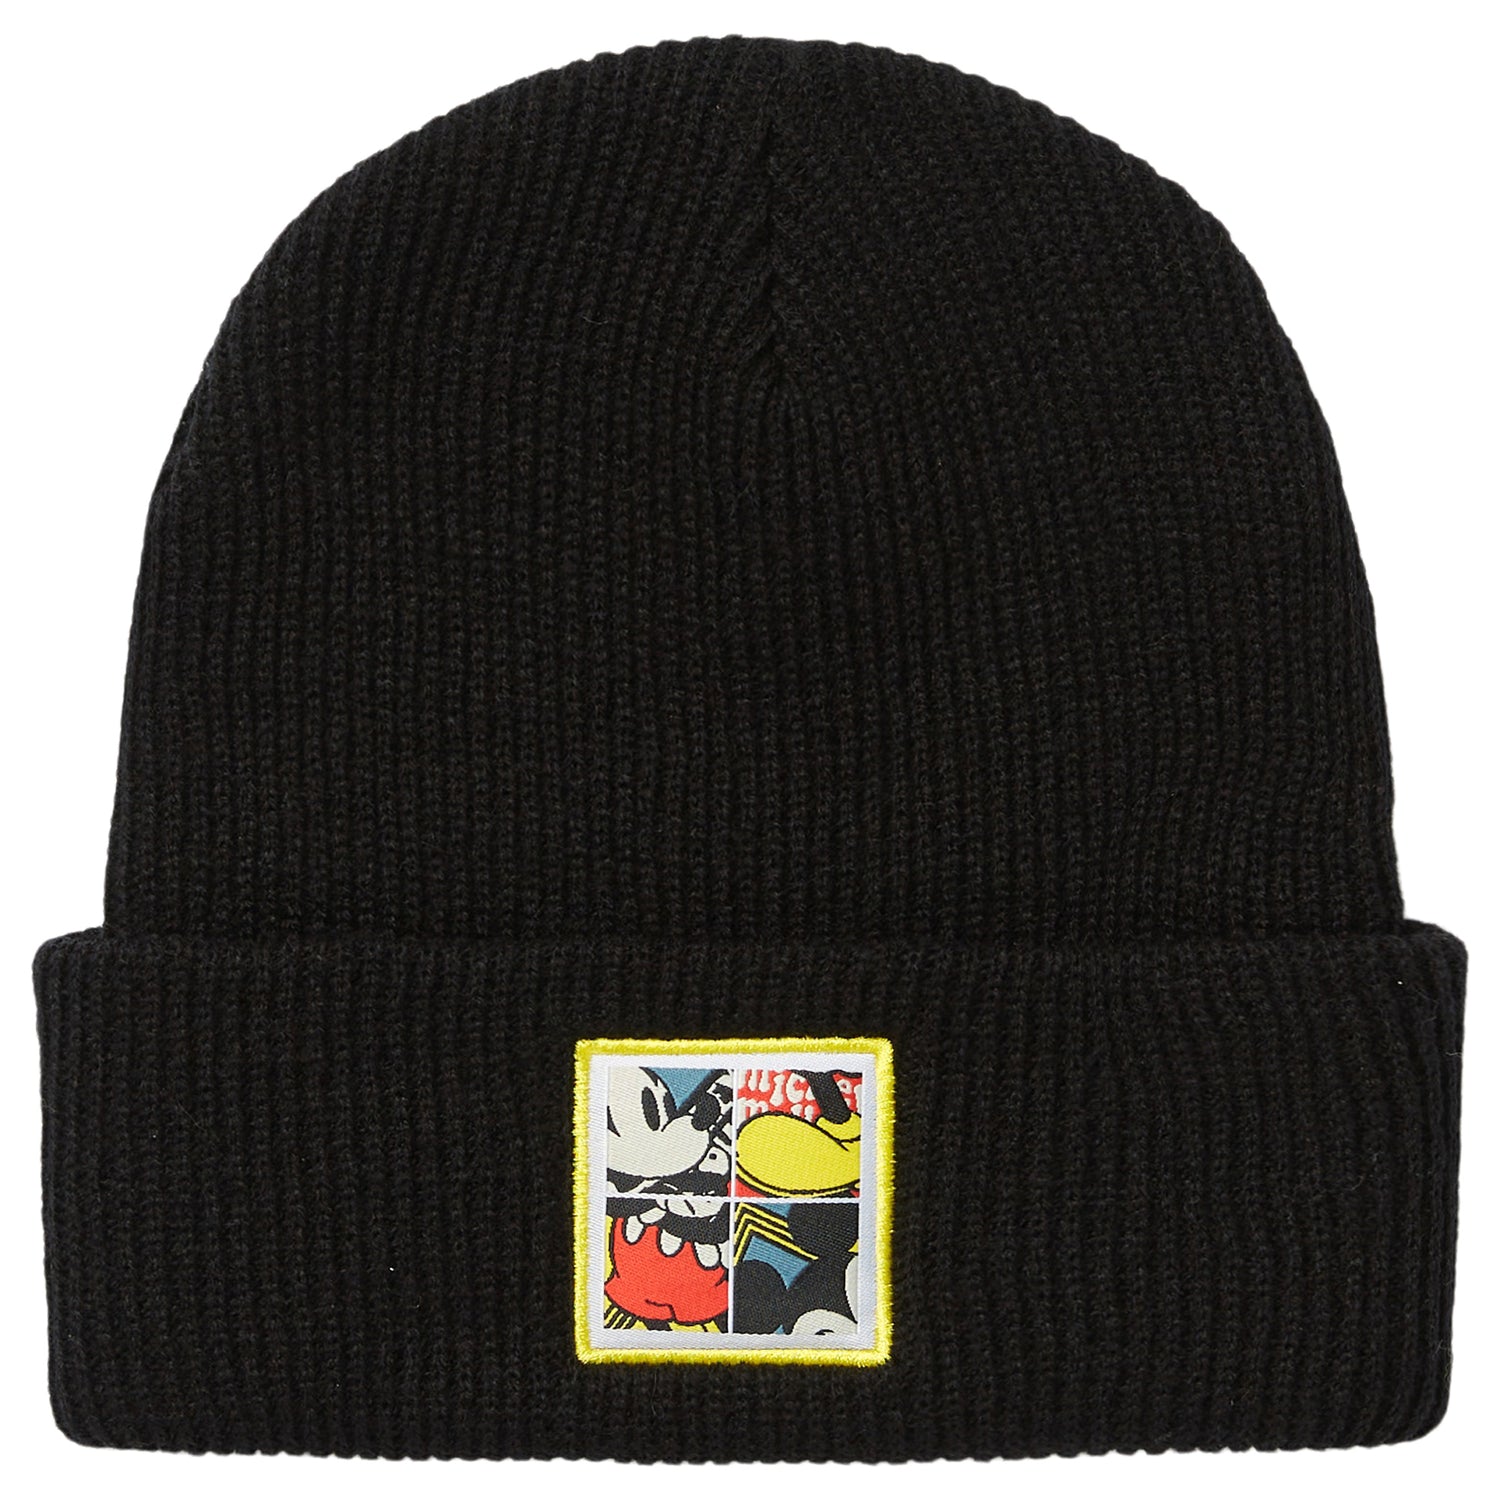 MICKEY MOUSE FOUR SQUARE BEANIE - BLACK